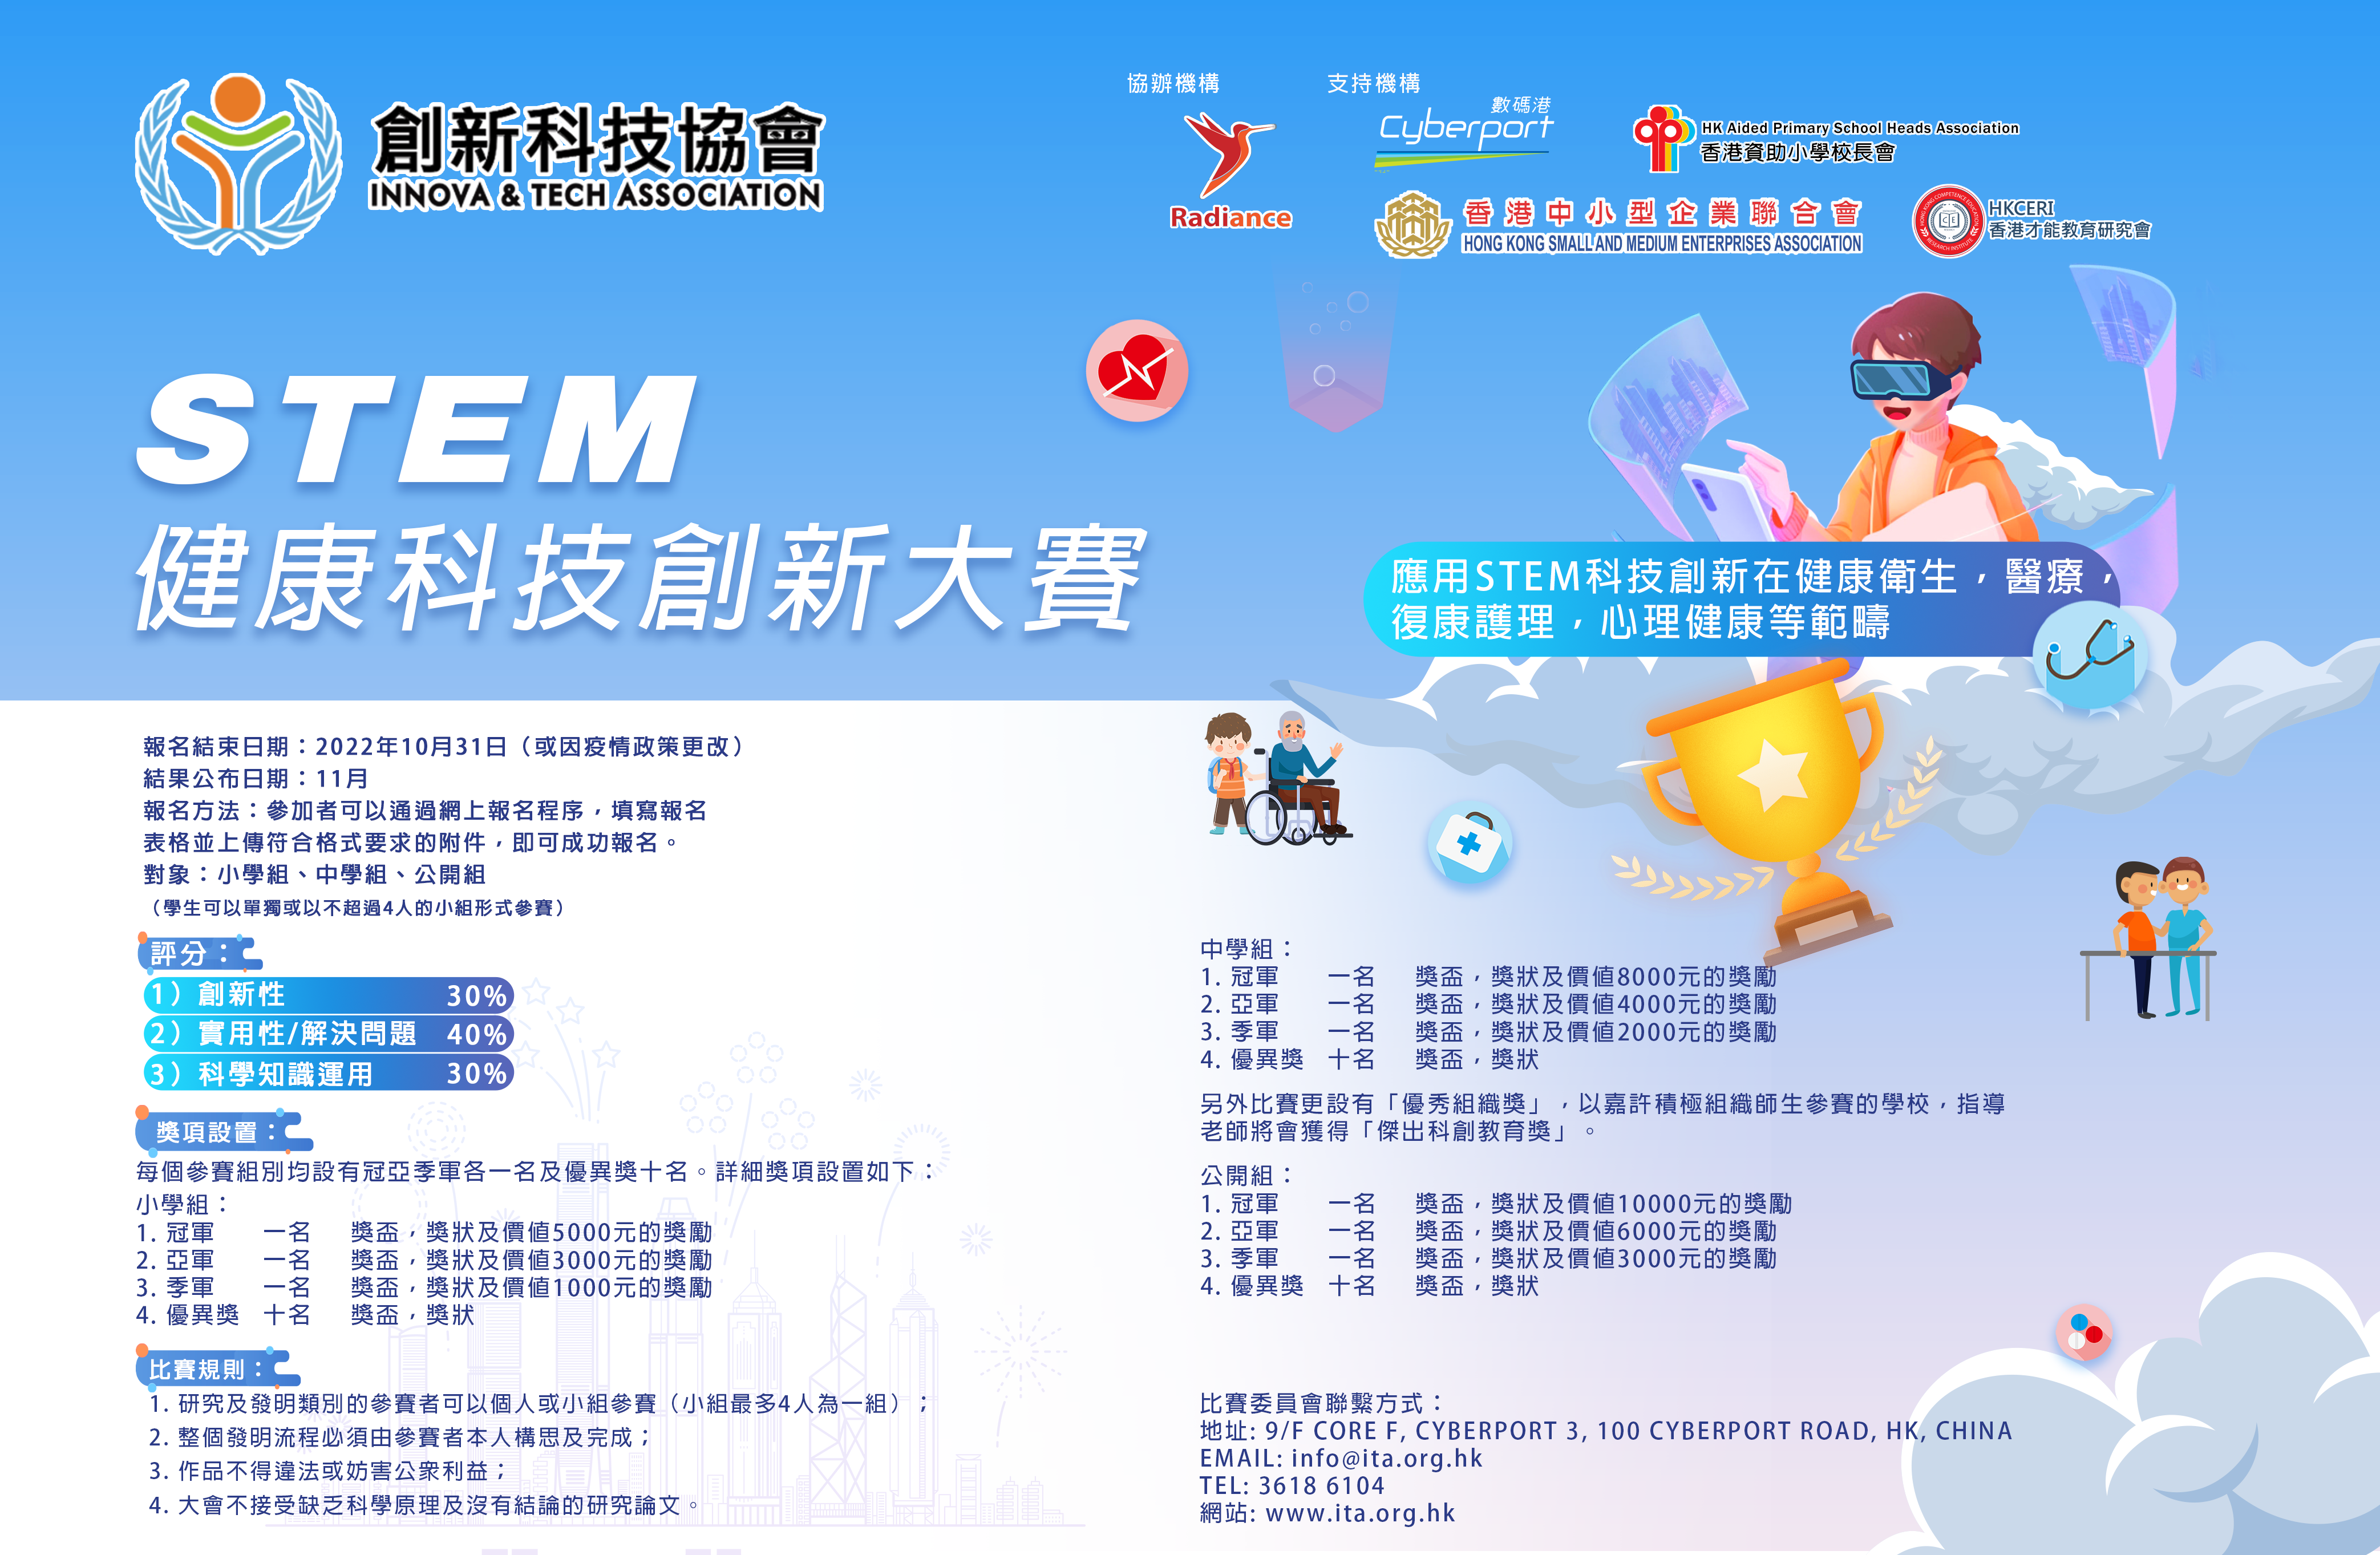 STEM Health Innovation and Technology Competition